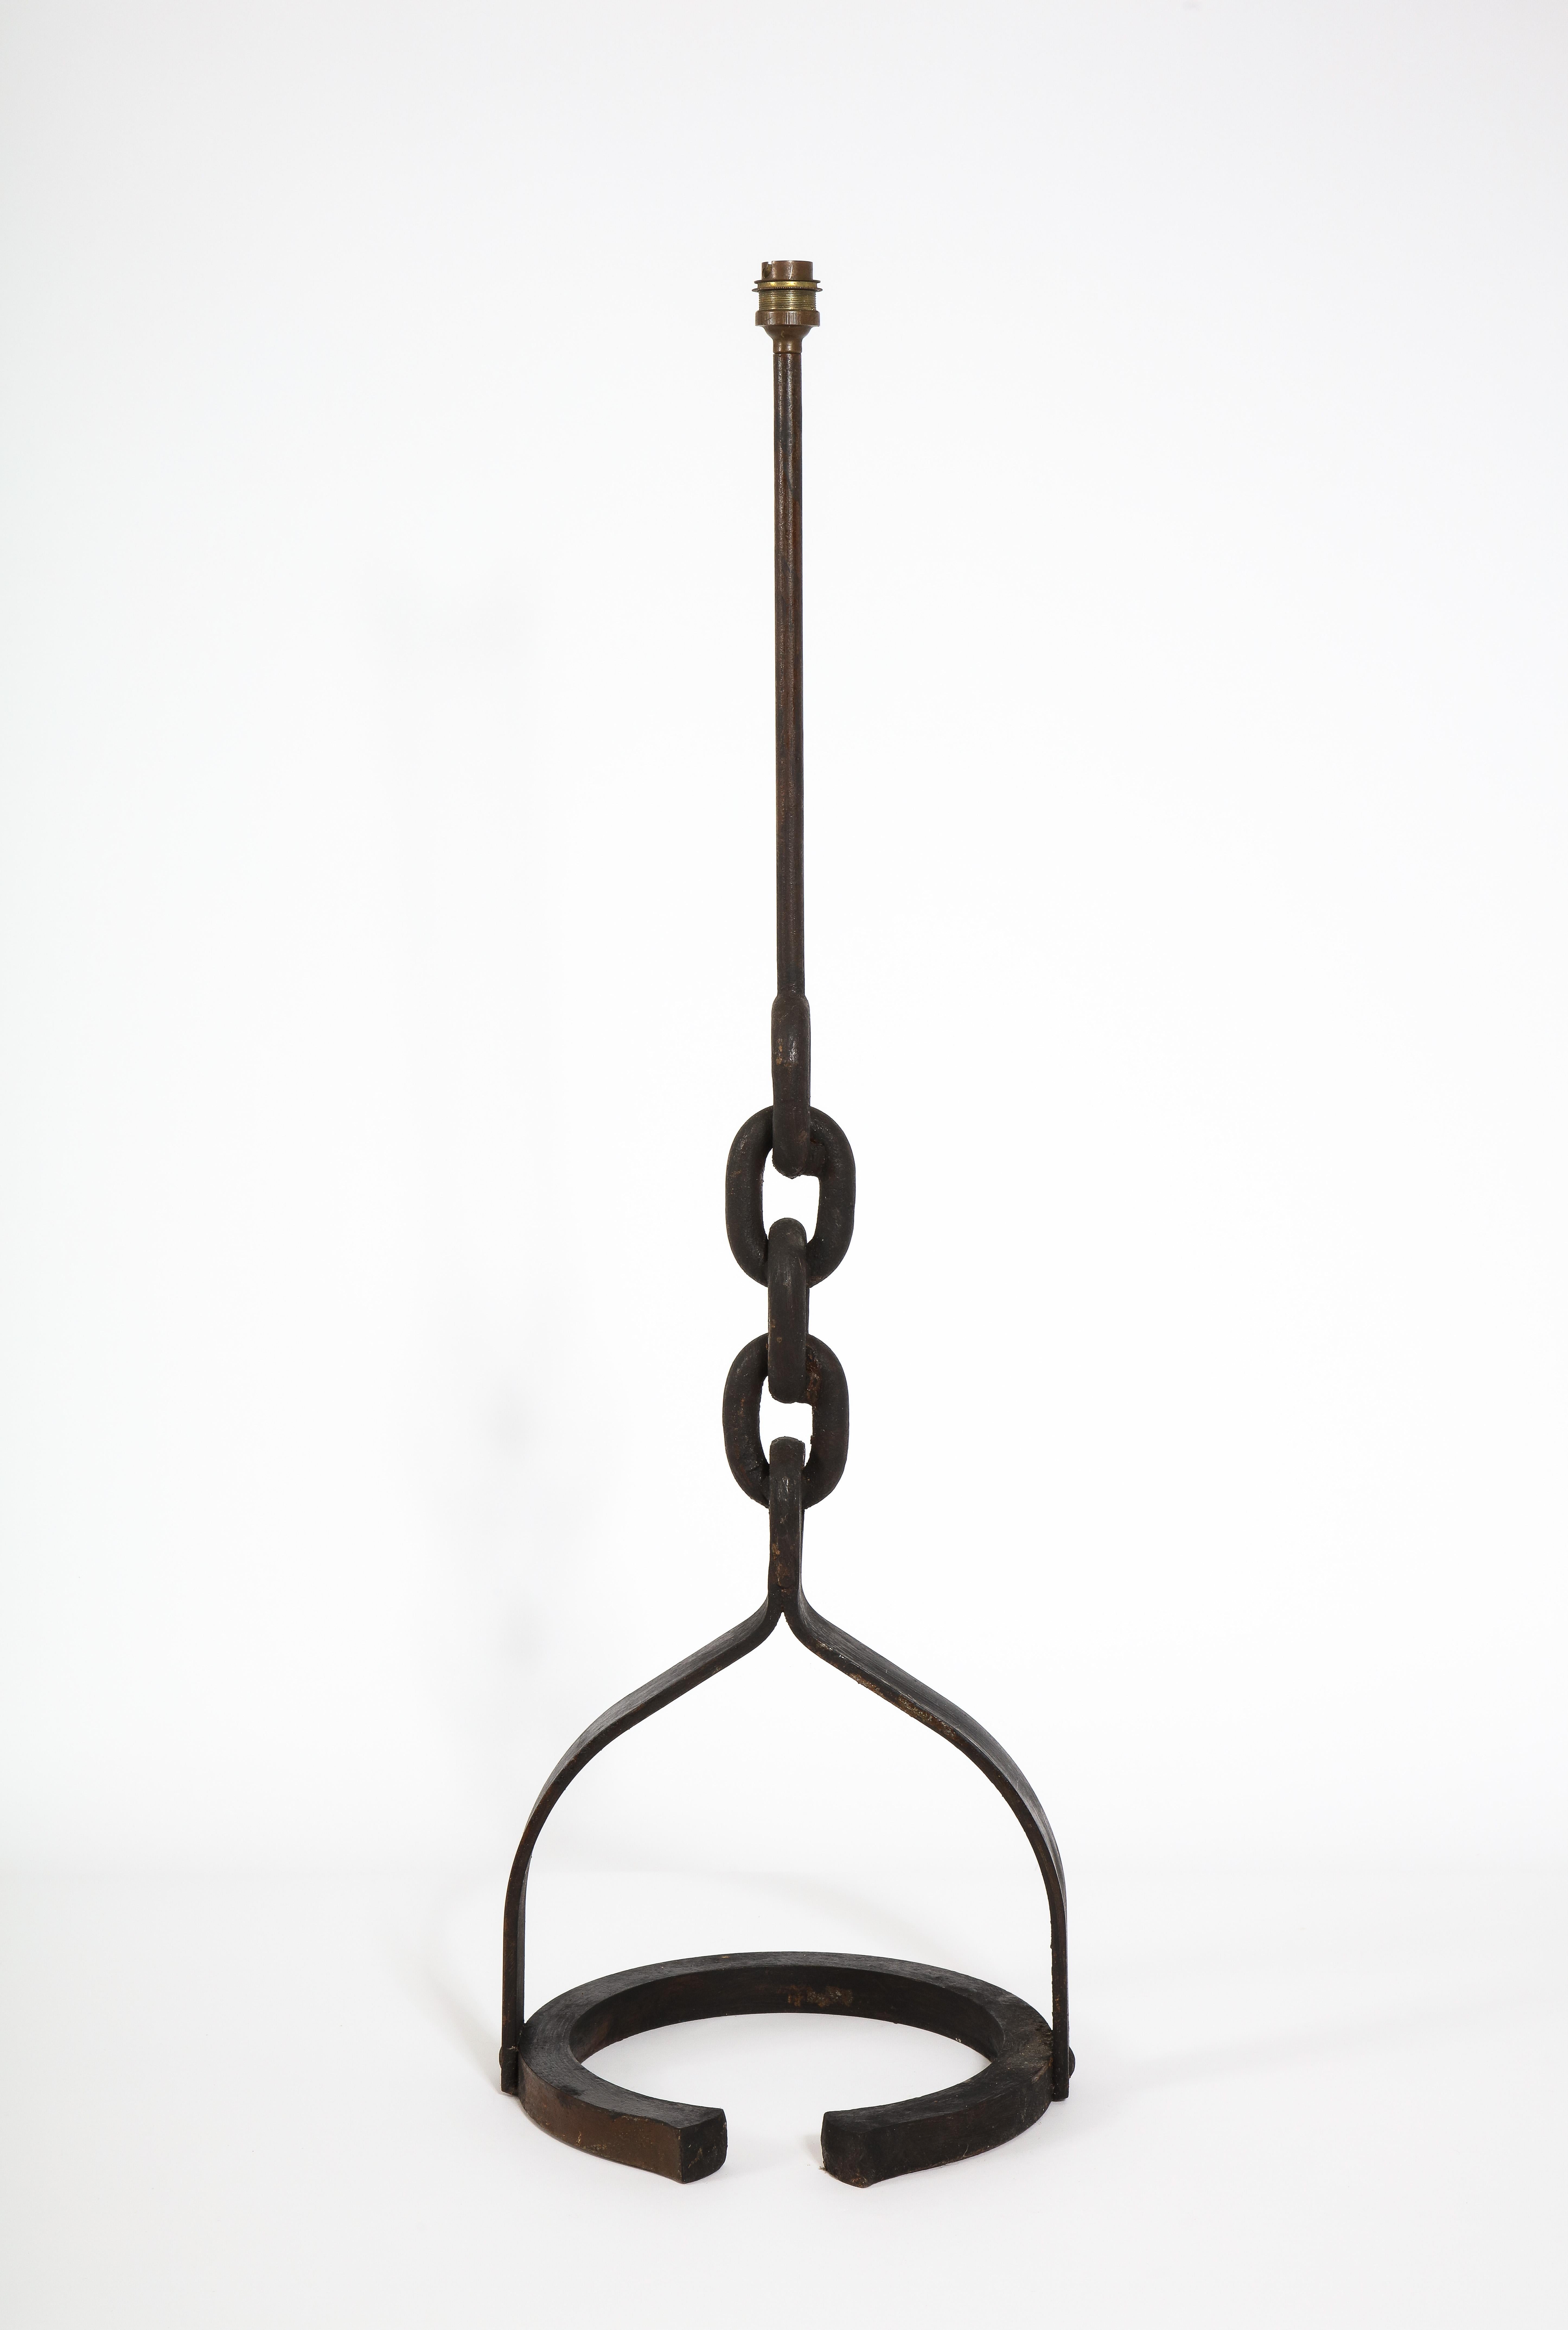 20th Century Classic Wrought Iron Chain Motif Table Lamp, France 1960's For Sale